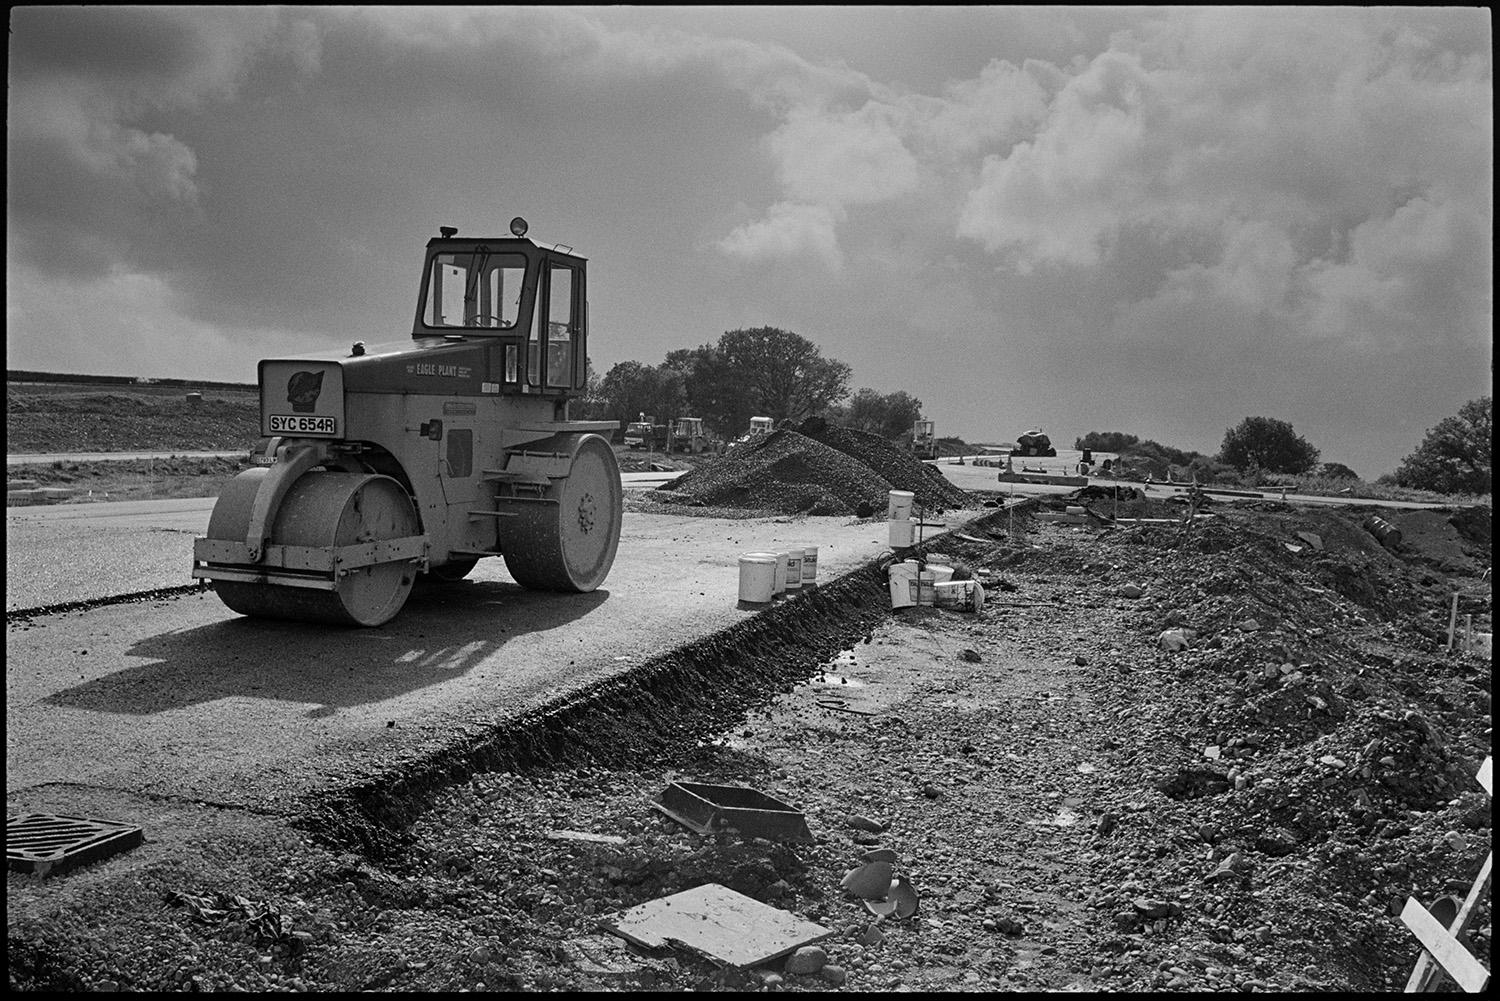 Machinery on new motorway link road shortly before it opened. Diesel roller and earth mover.
[A diesel roller working on the North Devon link road near Rackenford shortly before it opened. Other machinery, piles of gravel and buckets are visible on the road. A stormy sky is in the background.]